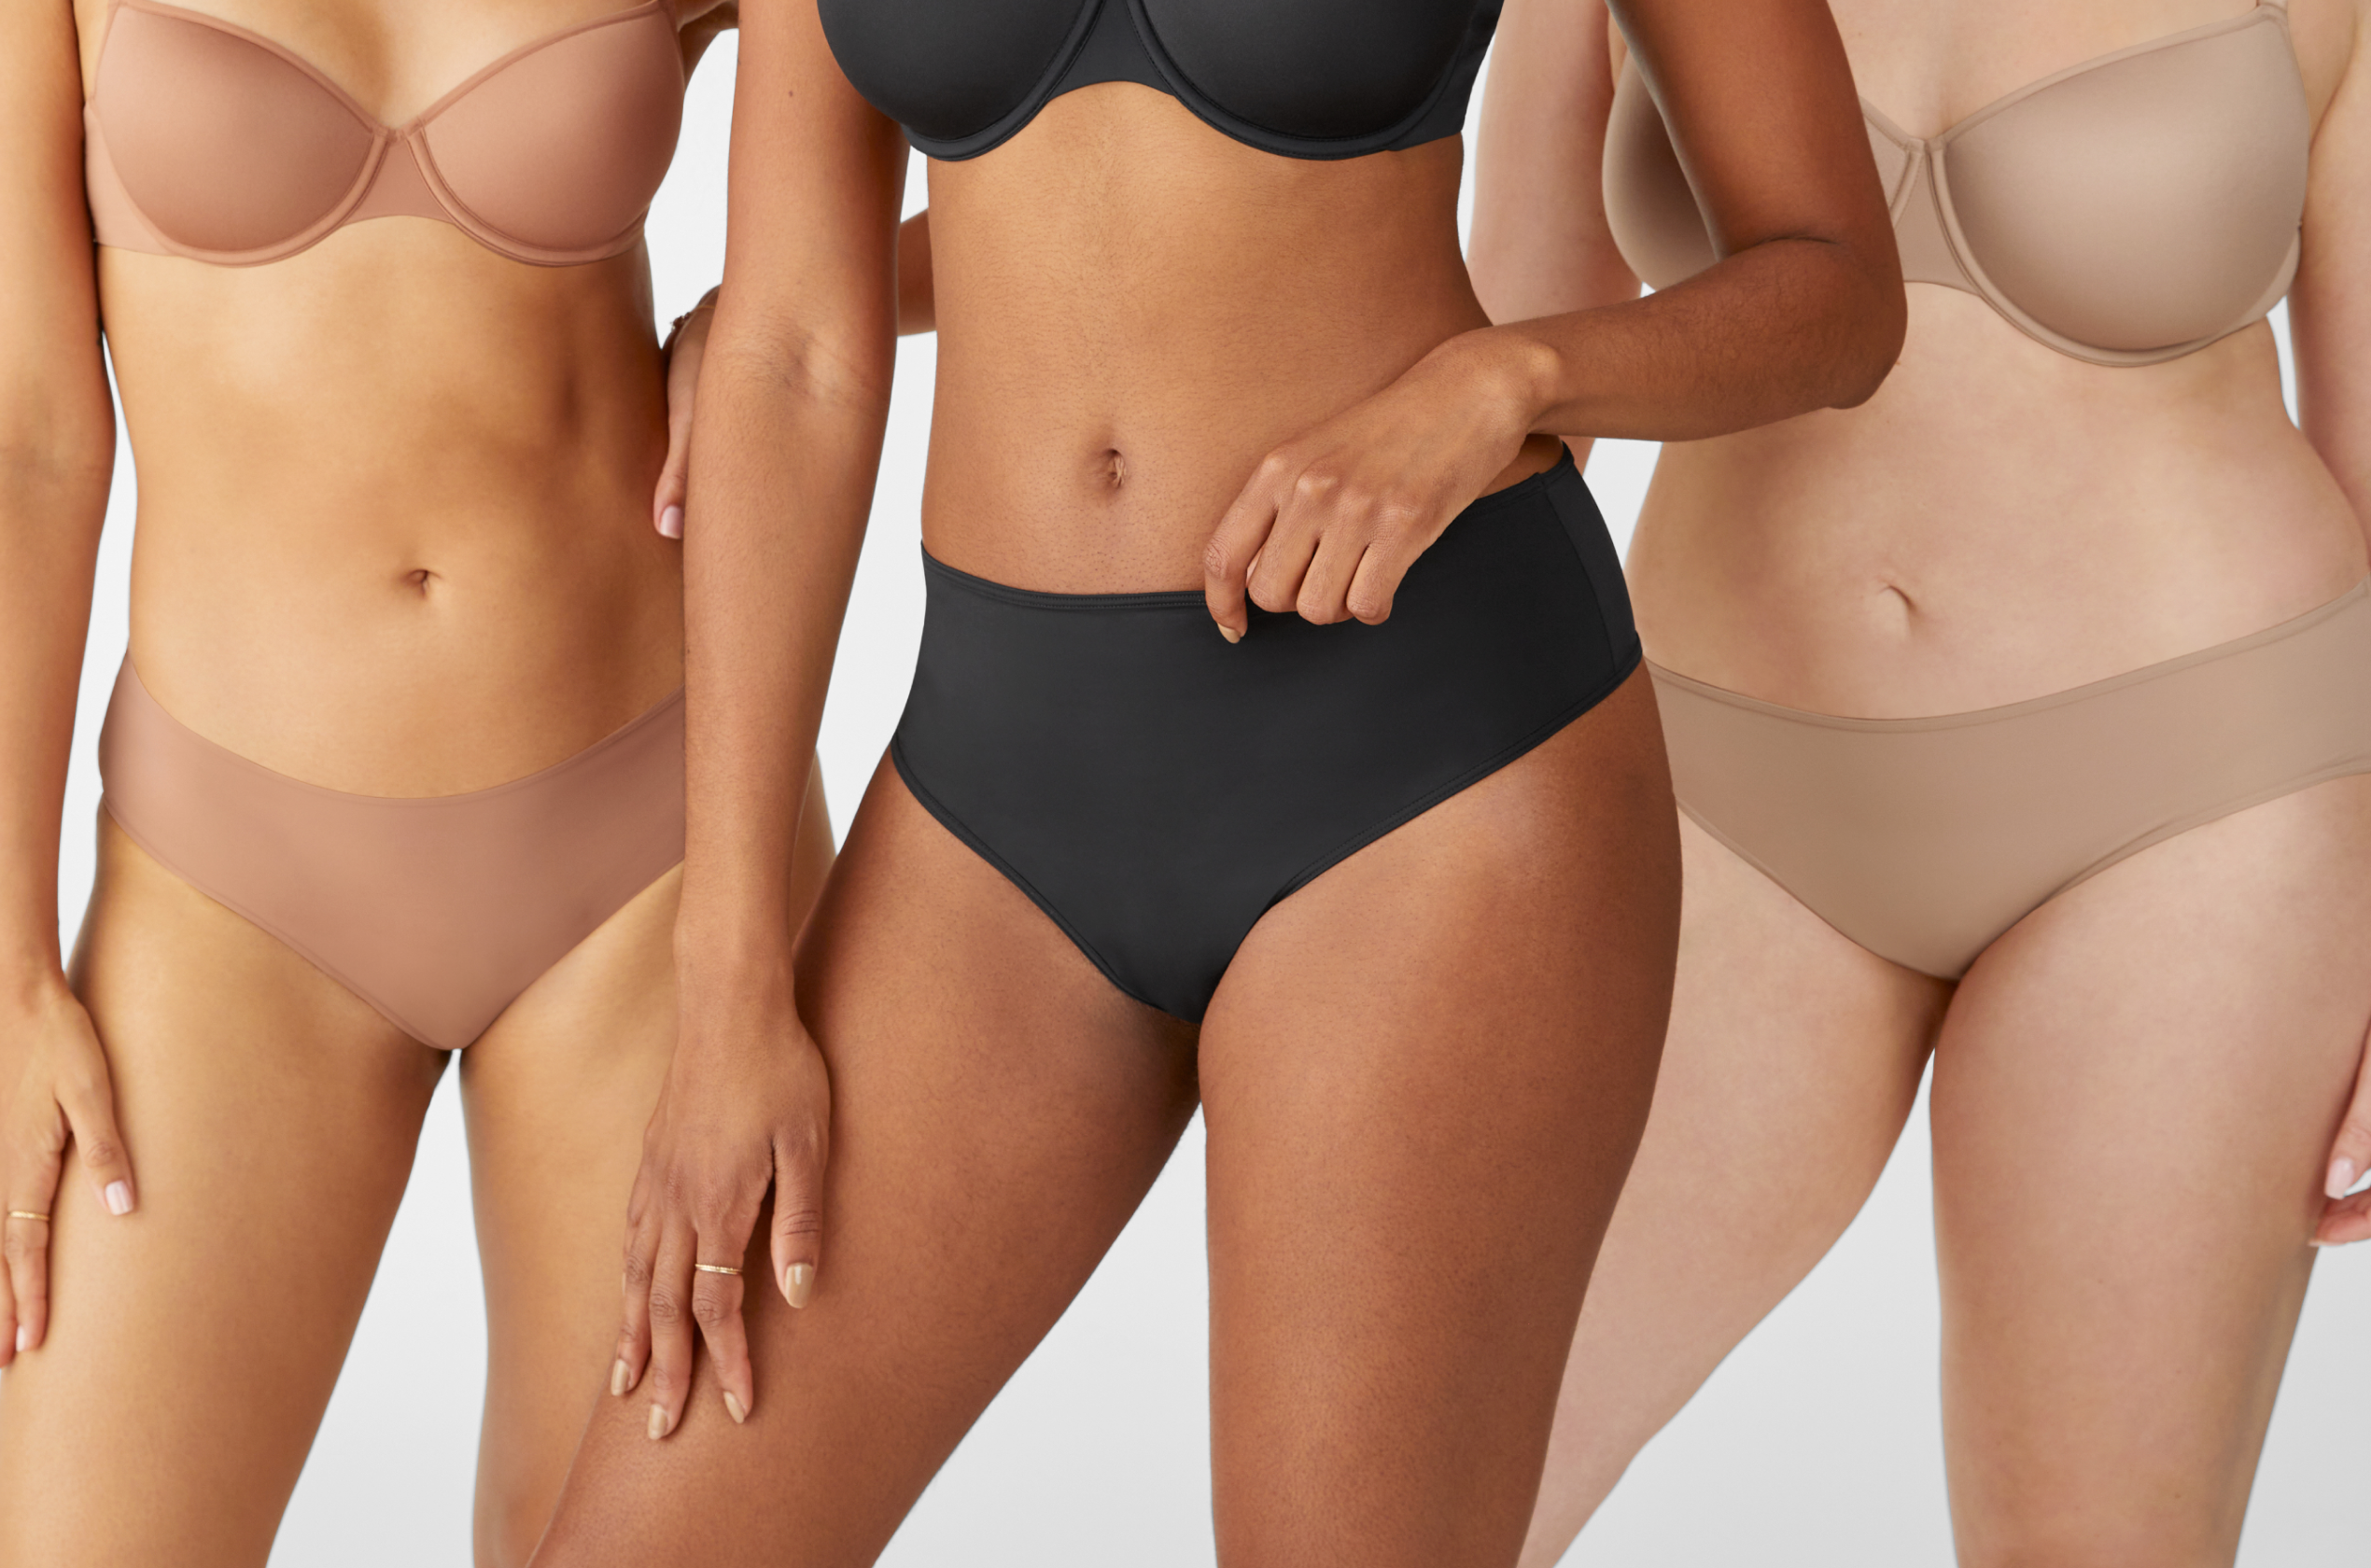 All Day Comfortable Underwear & Bra Matching Sets Just Launched At  ThirdLove - Bras & Underwear For Everyday Wear